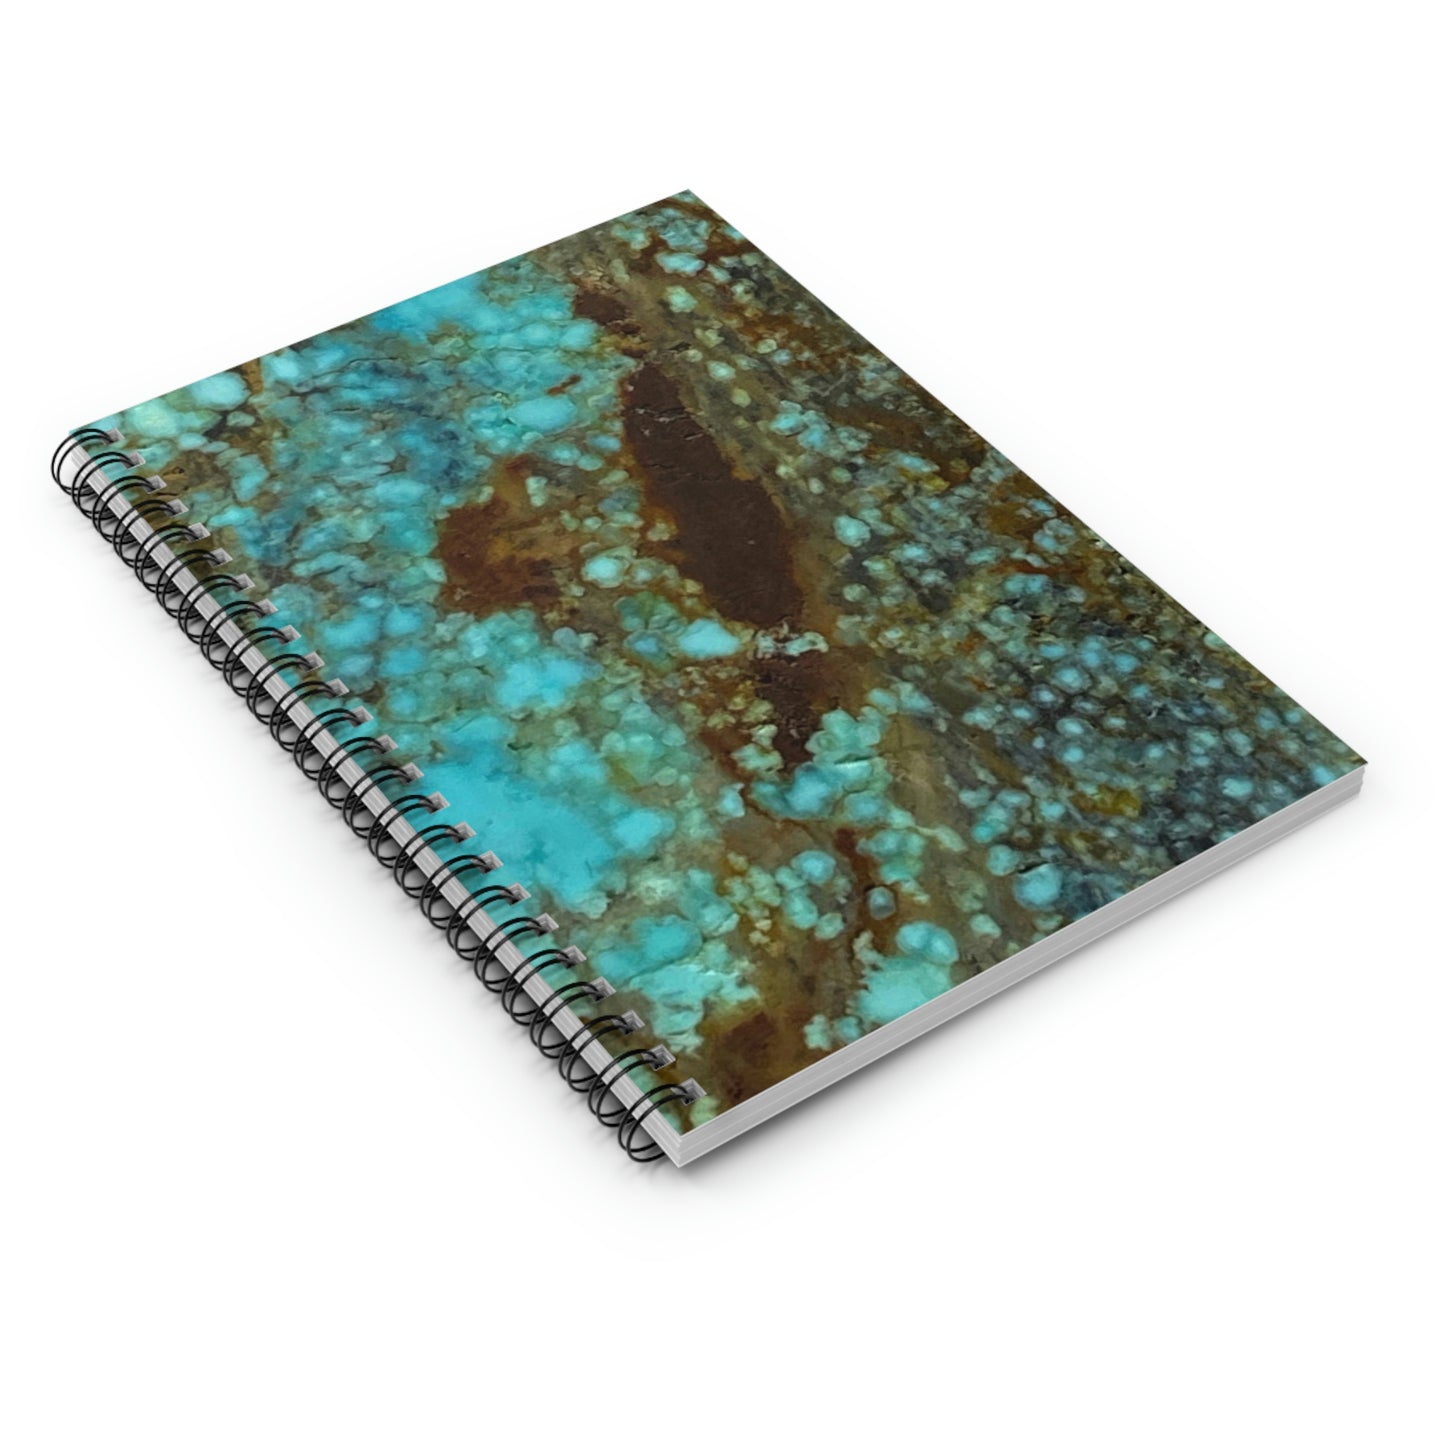 Turquoise Design Spiral Notebook - Ruled Line